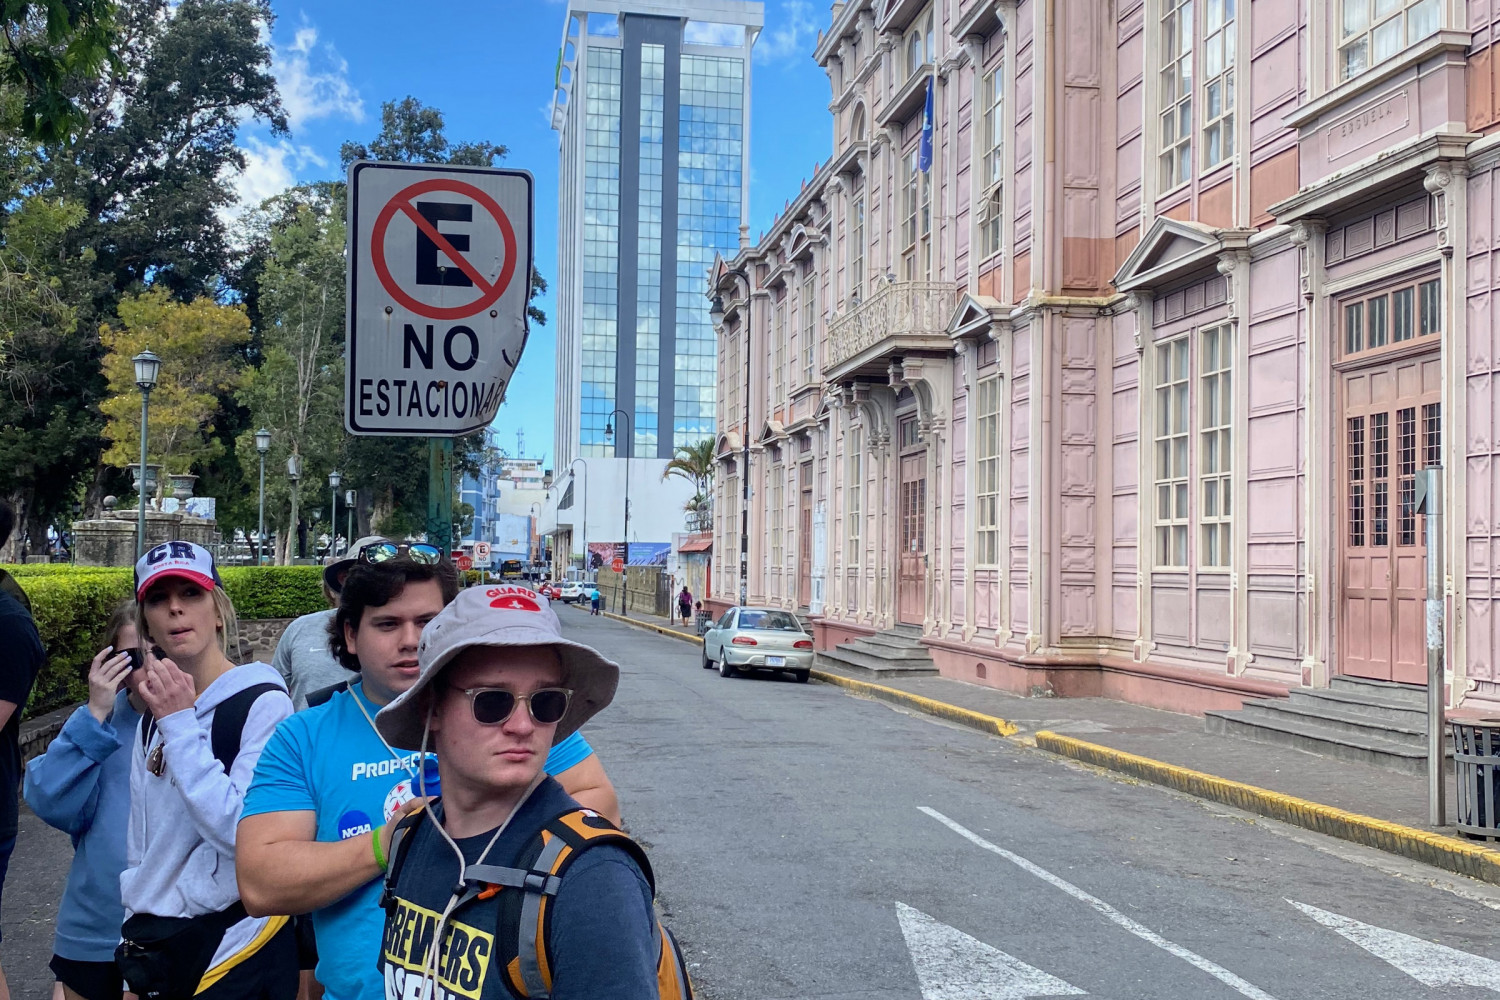 Students walking through a city in Costa Rica